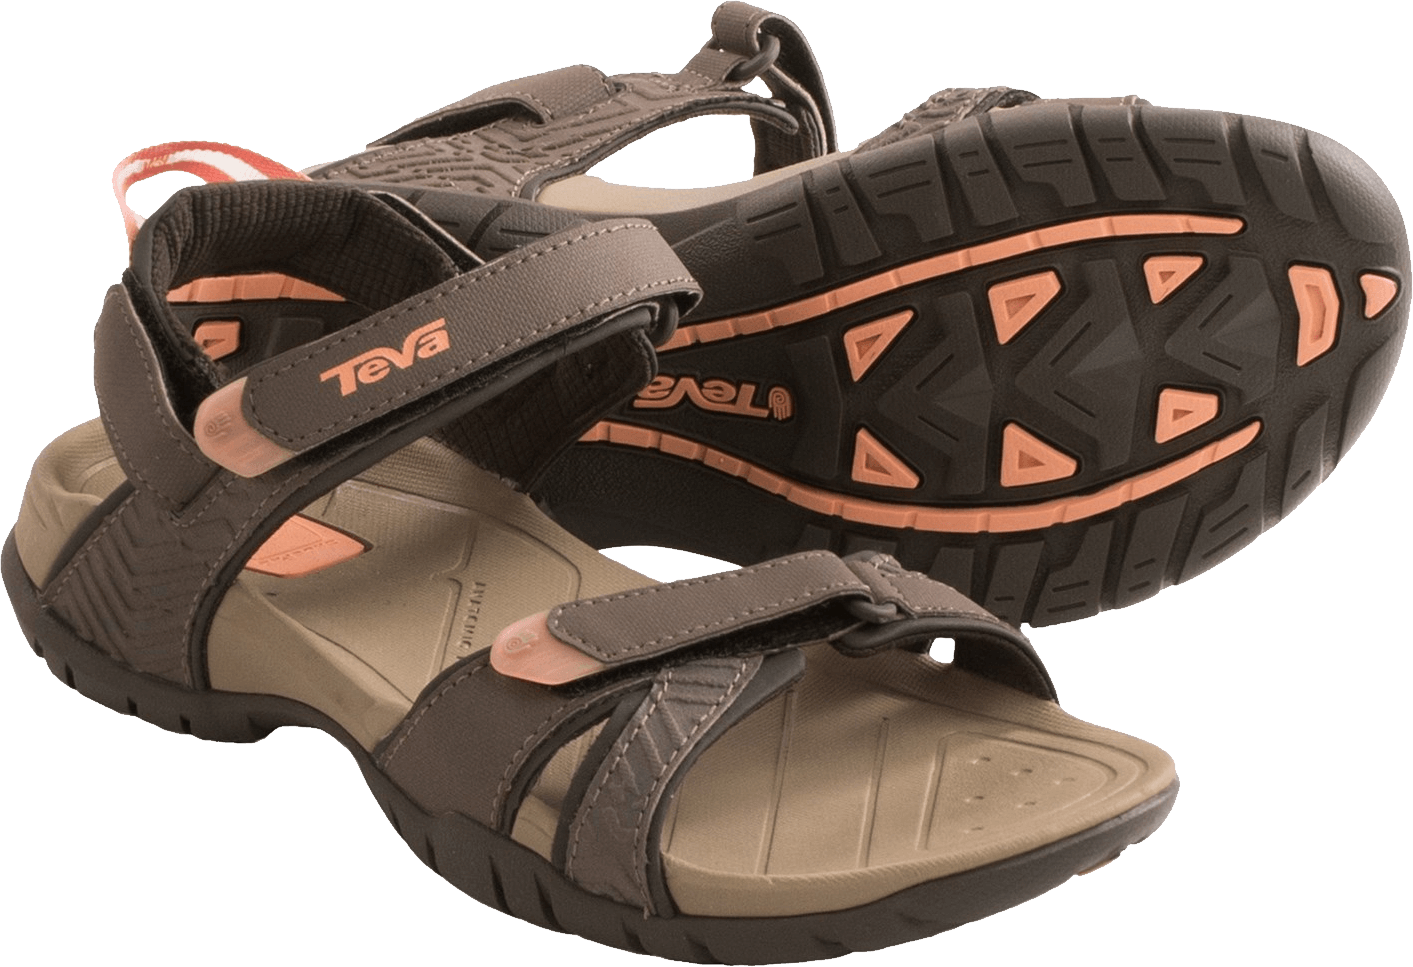 Sandals Coupons & Promo Codes